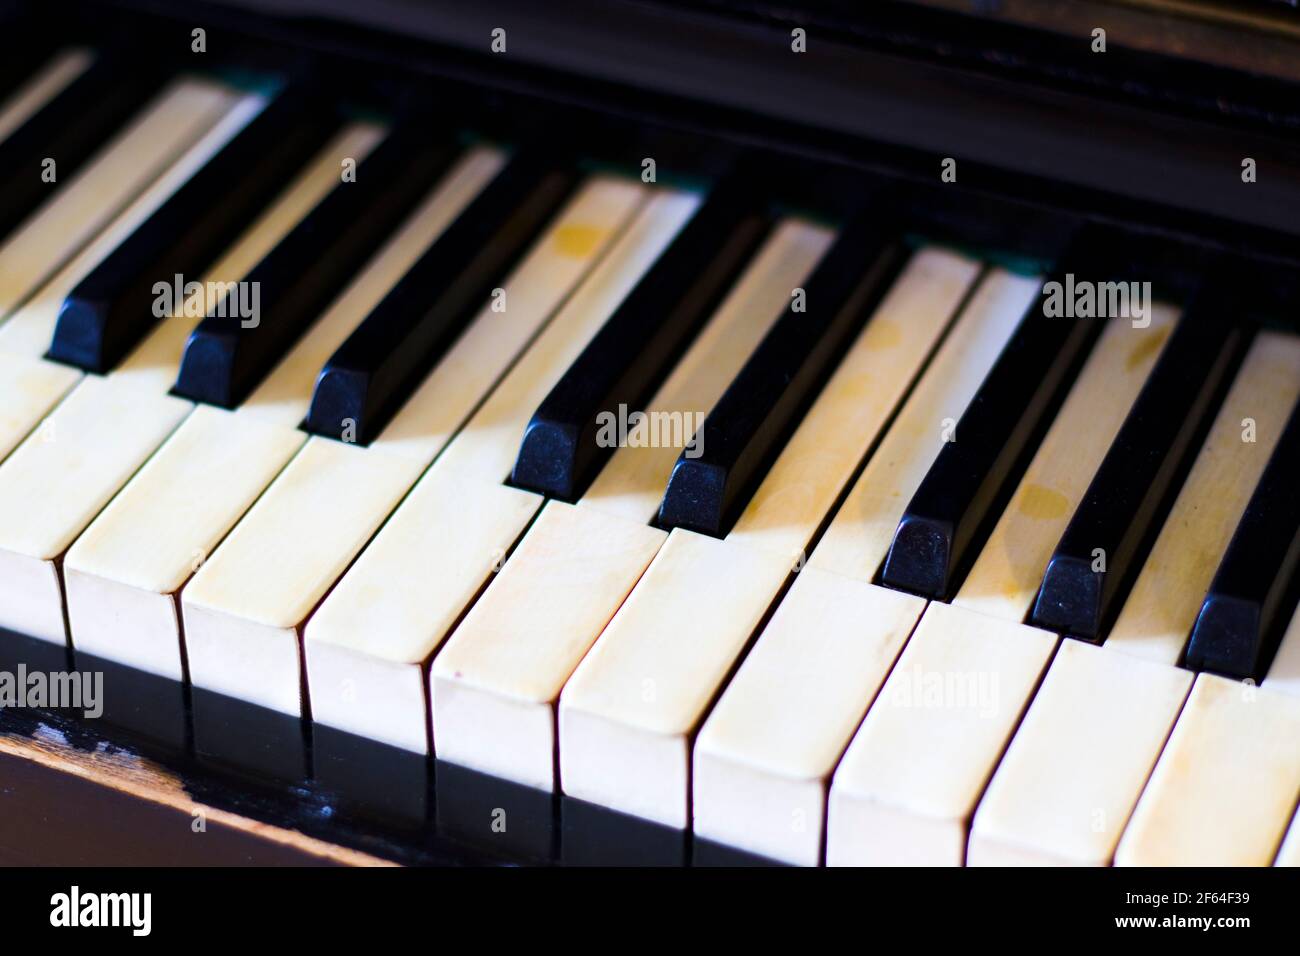 Piano keyboard, black and white key, close-up and macro, retro and vintage piano, music instrument Stock Photo